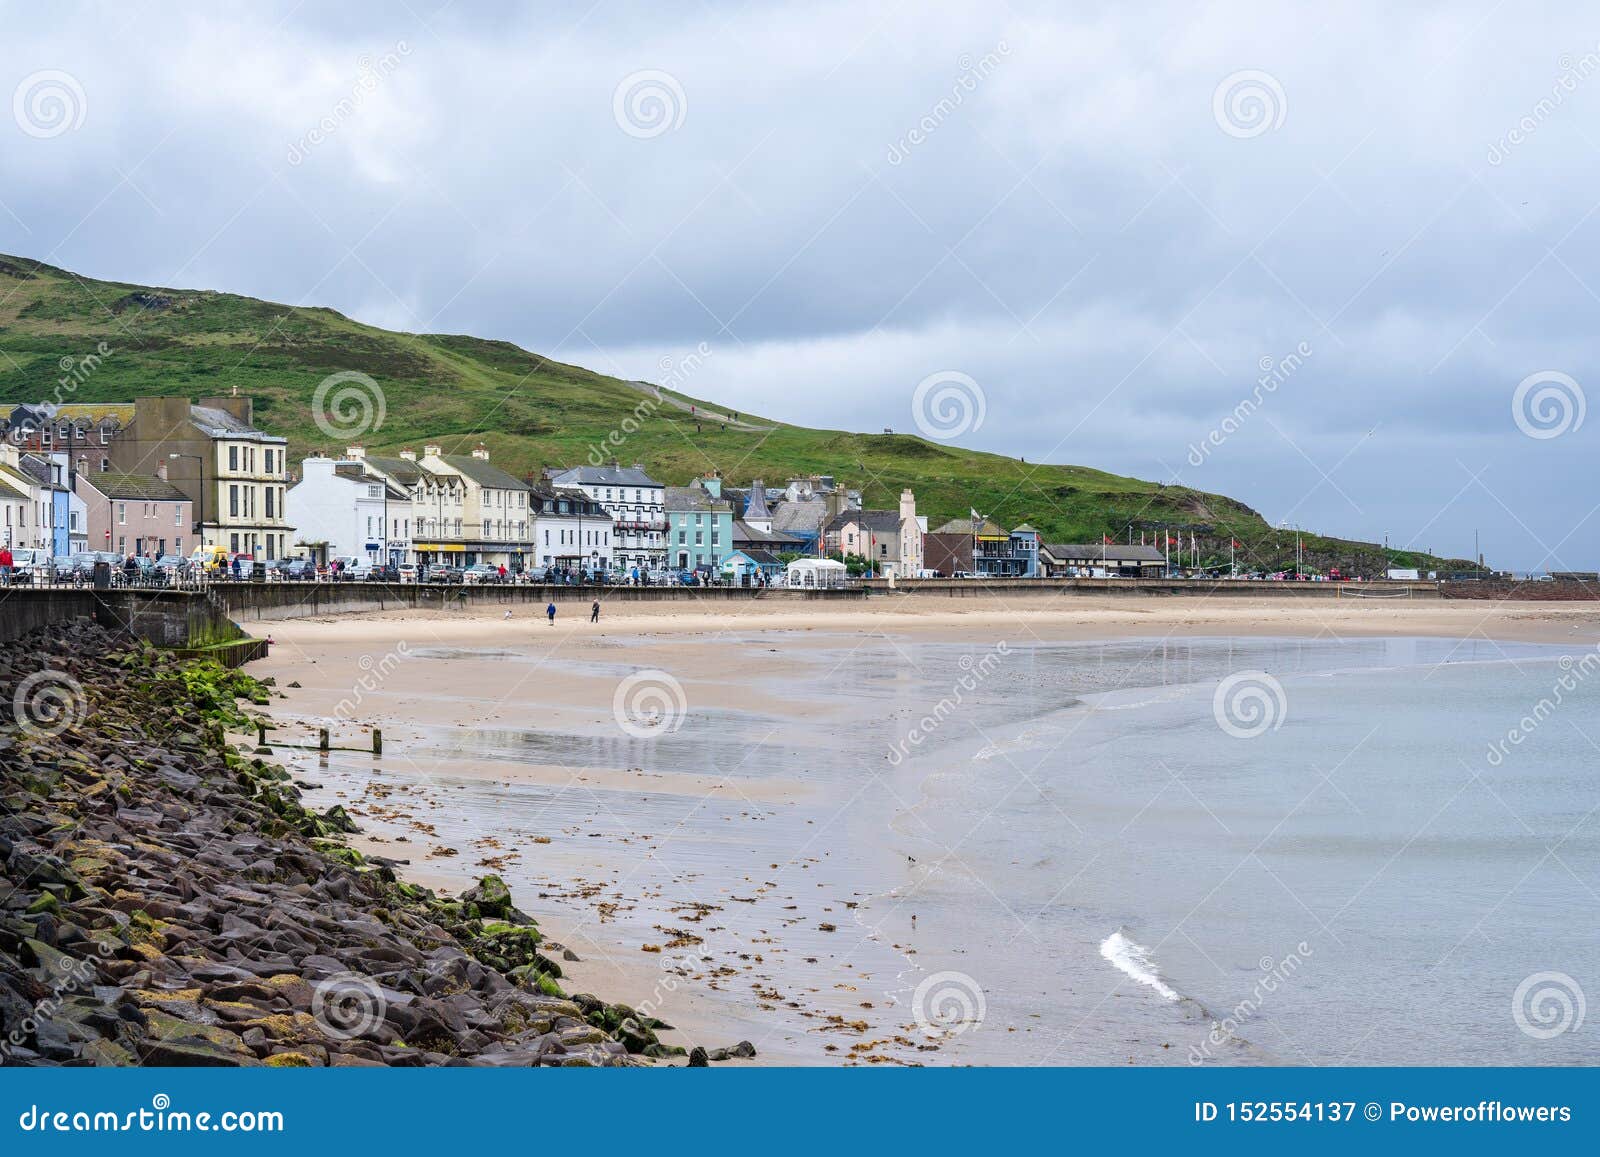 peel, isle of man, june 16,2019. it is a seaside town and small fishing port on the isle of man, in the historic parish of german